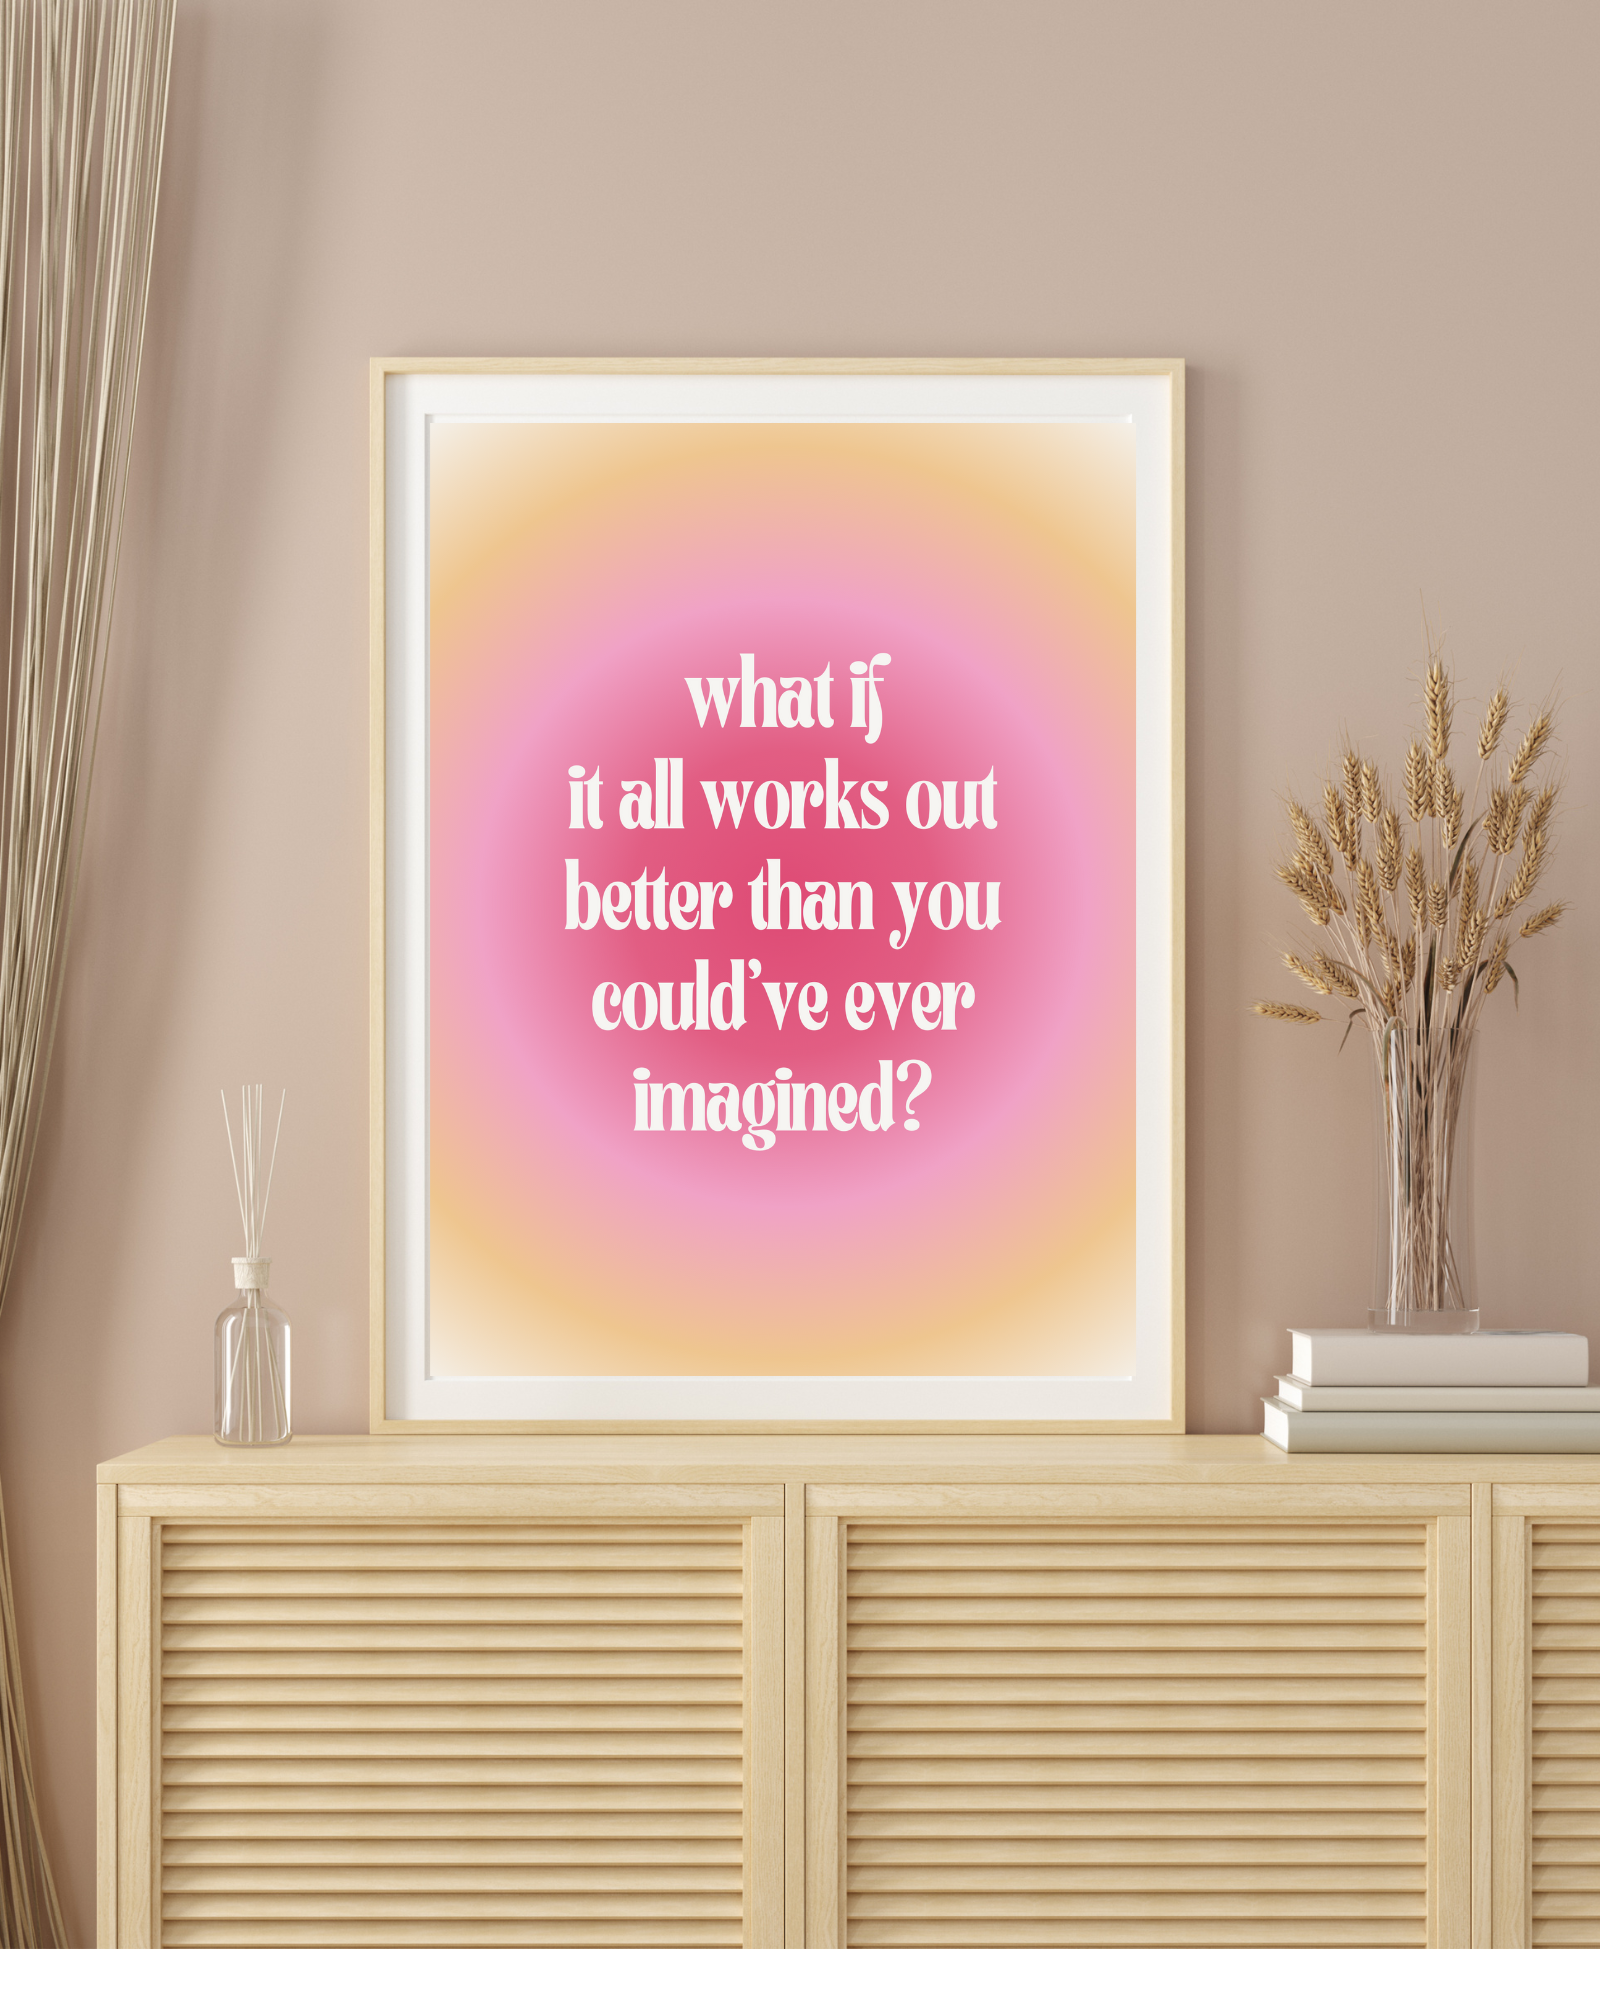 Mindset Affirmation Print with orange and pink gradient background with text saying "what if it all works out better than you could've ever imagined?"